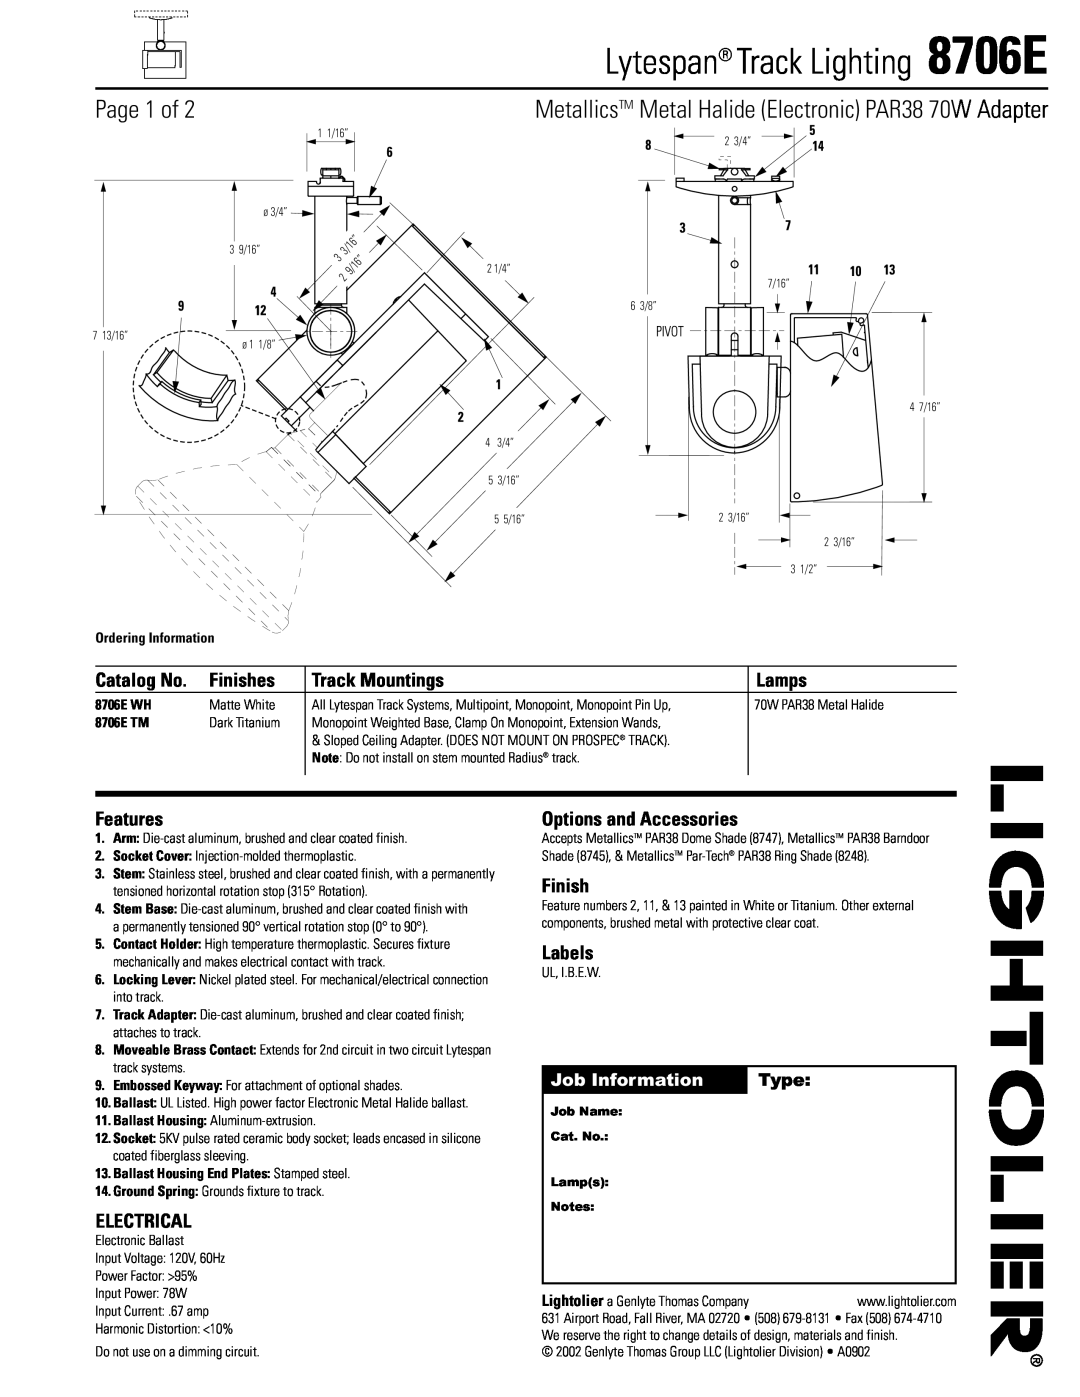 Lightolier 8706E manual Catalog No, Finishes, Track Mountings, Lamps, Features, Electrical, Options and Accessories, Type 